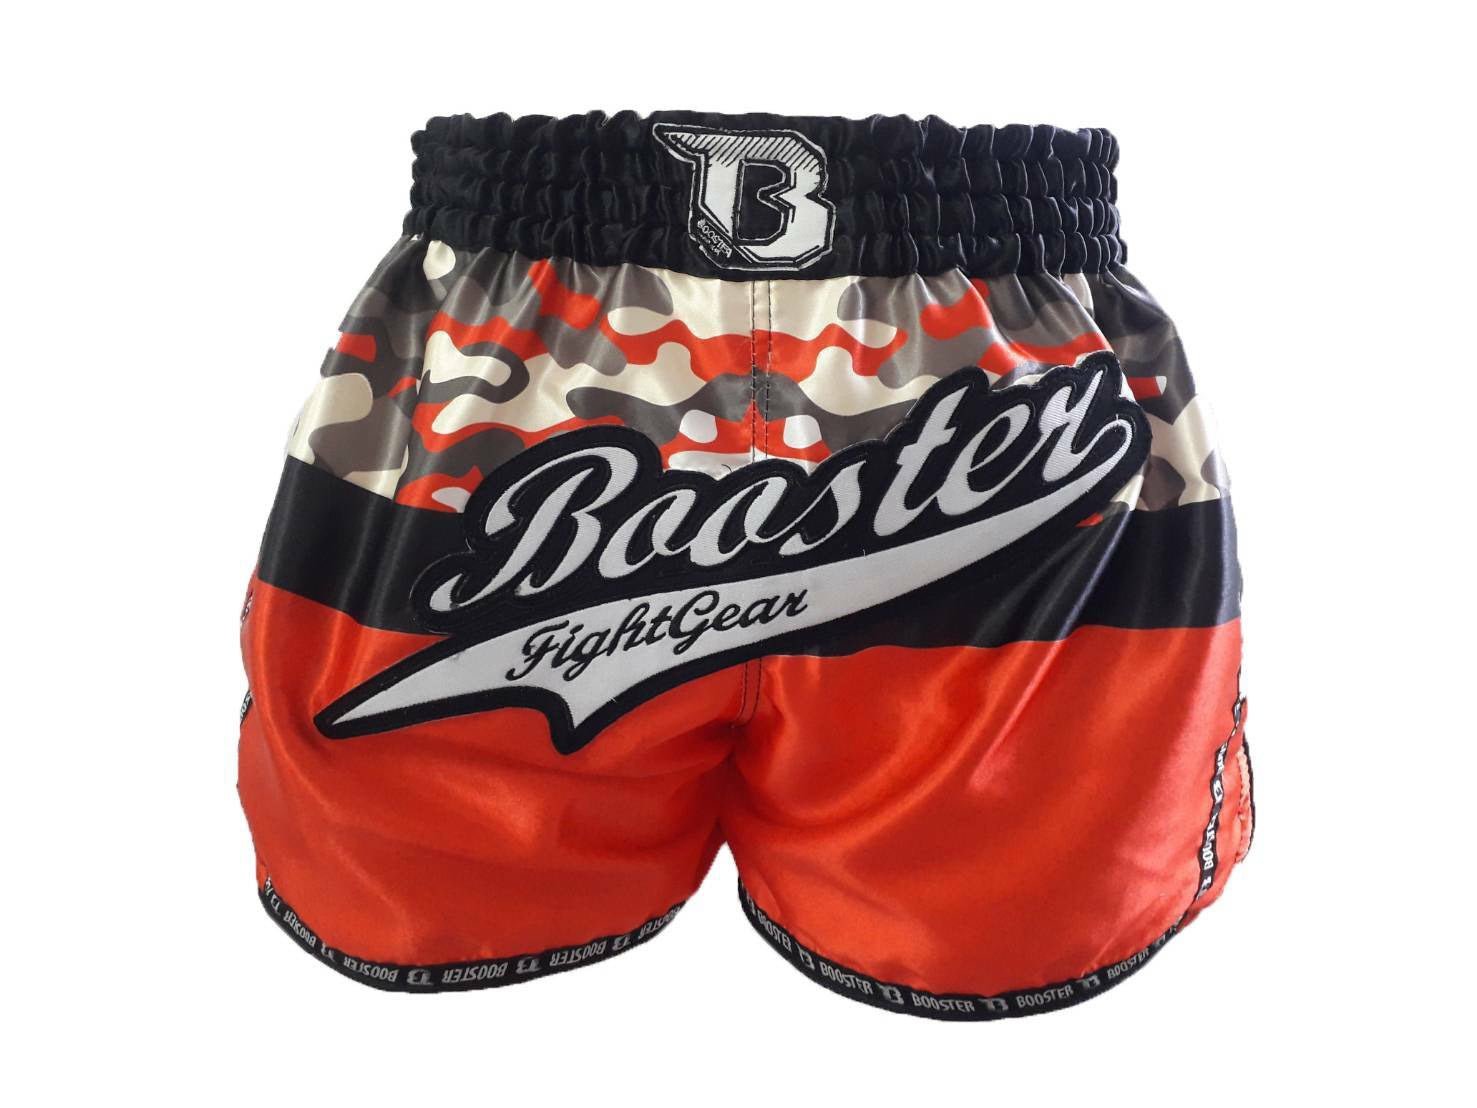 Booster Shorts Camo Force Red Booster